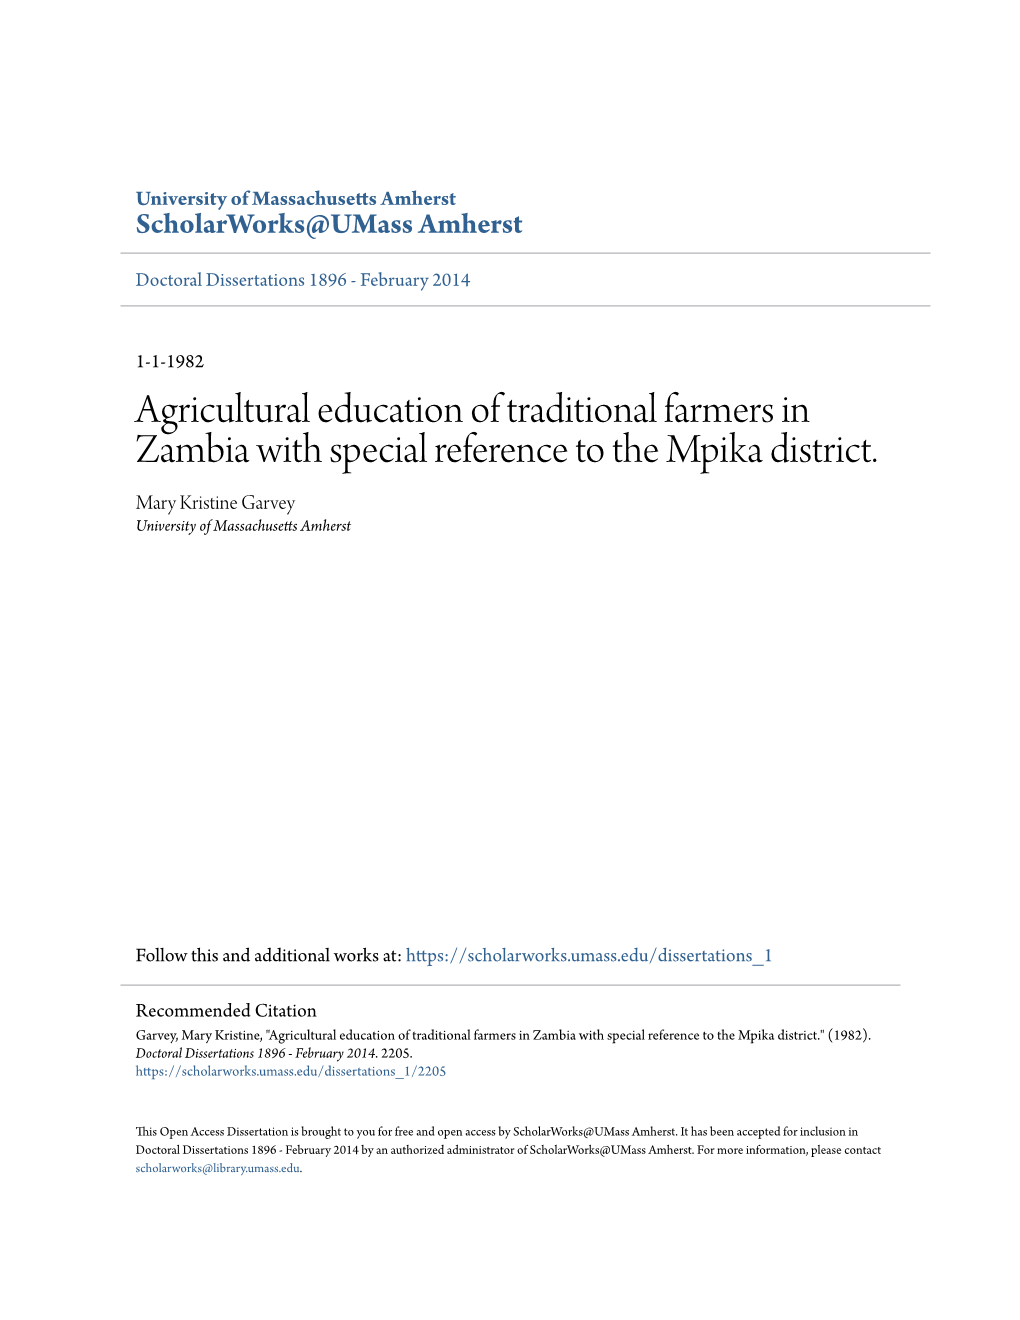 Agricultural Education of Traditional Farmers in Zambia with Special Reference to the Mpika District. Mary Kristine Garvey University of Massachusetts Amherst